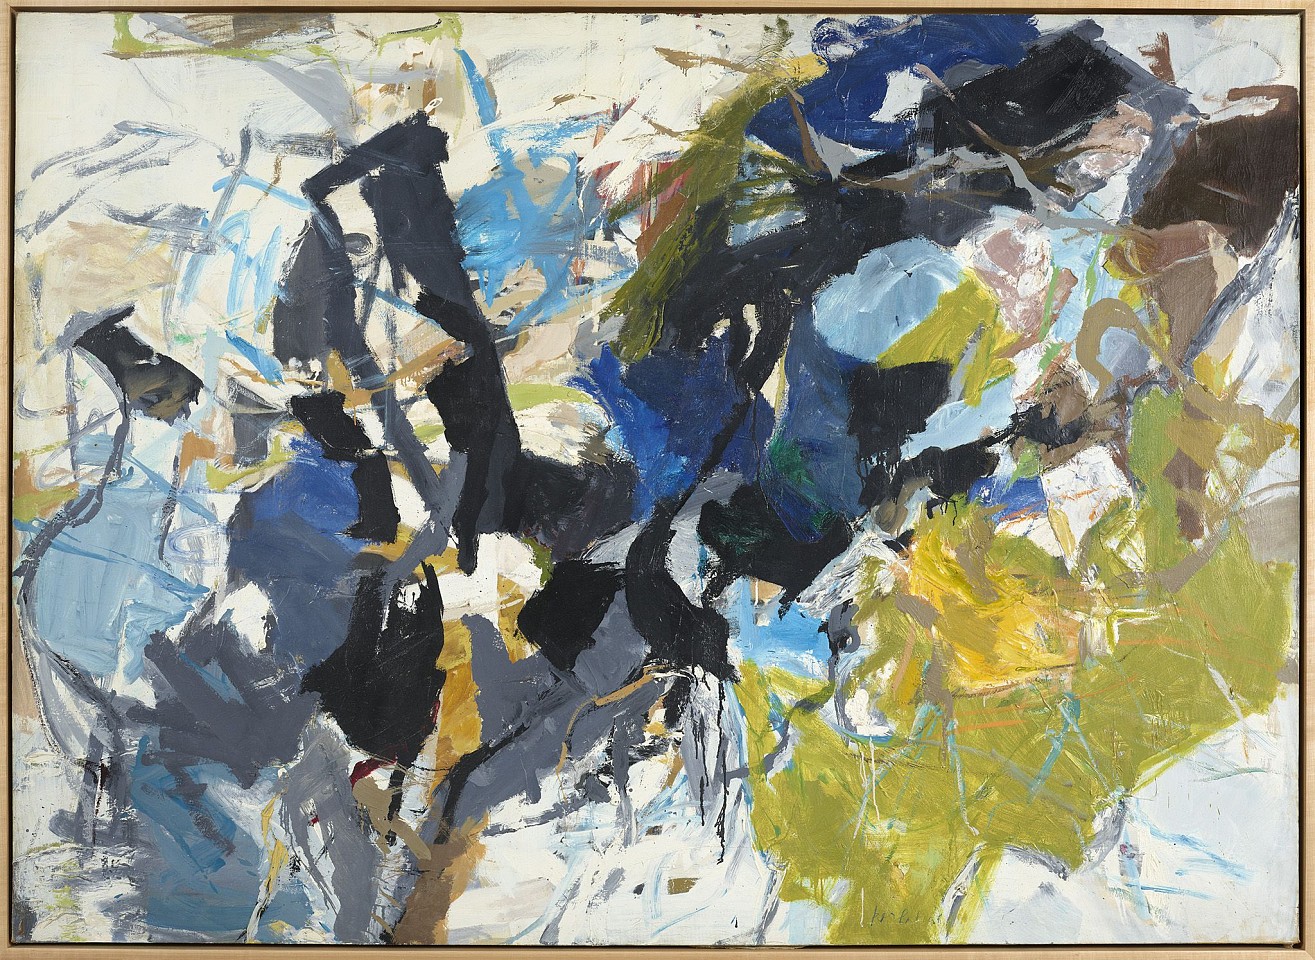 Perle Fine, The Wave, Roaring, Breaking (Gardenpartie), 1959
Oil and collage on canvas, 68 x 94 in. (172.7 x 238.8 cm)
FIN-00131